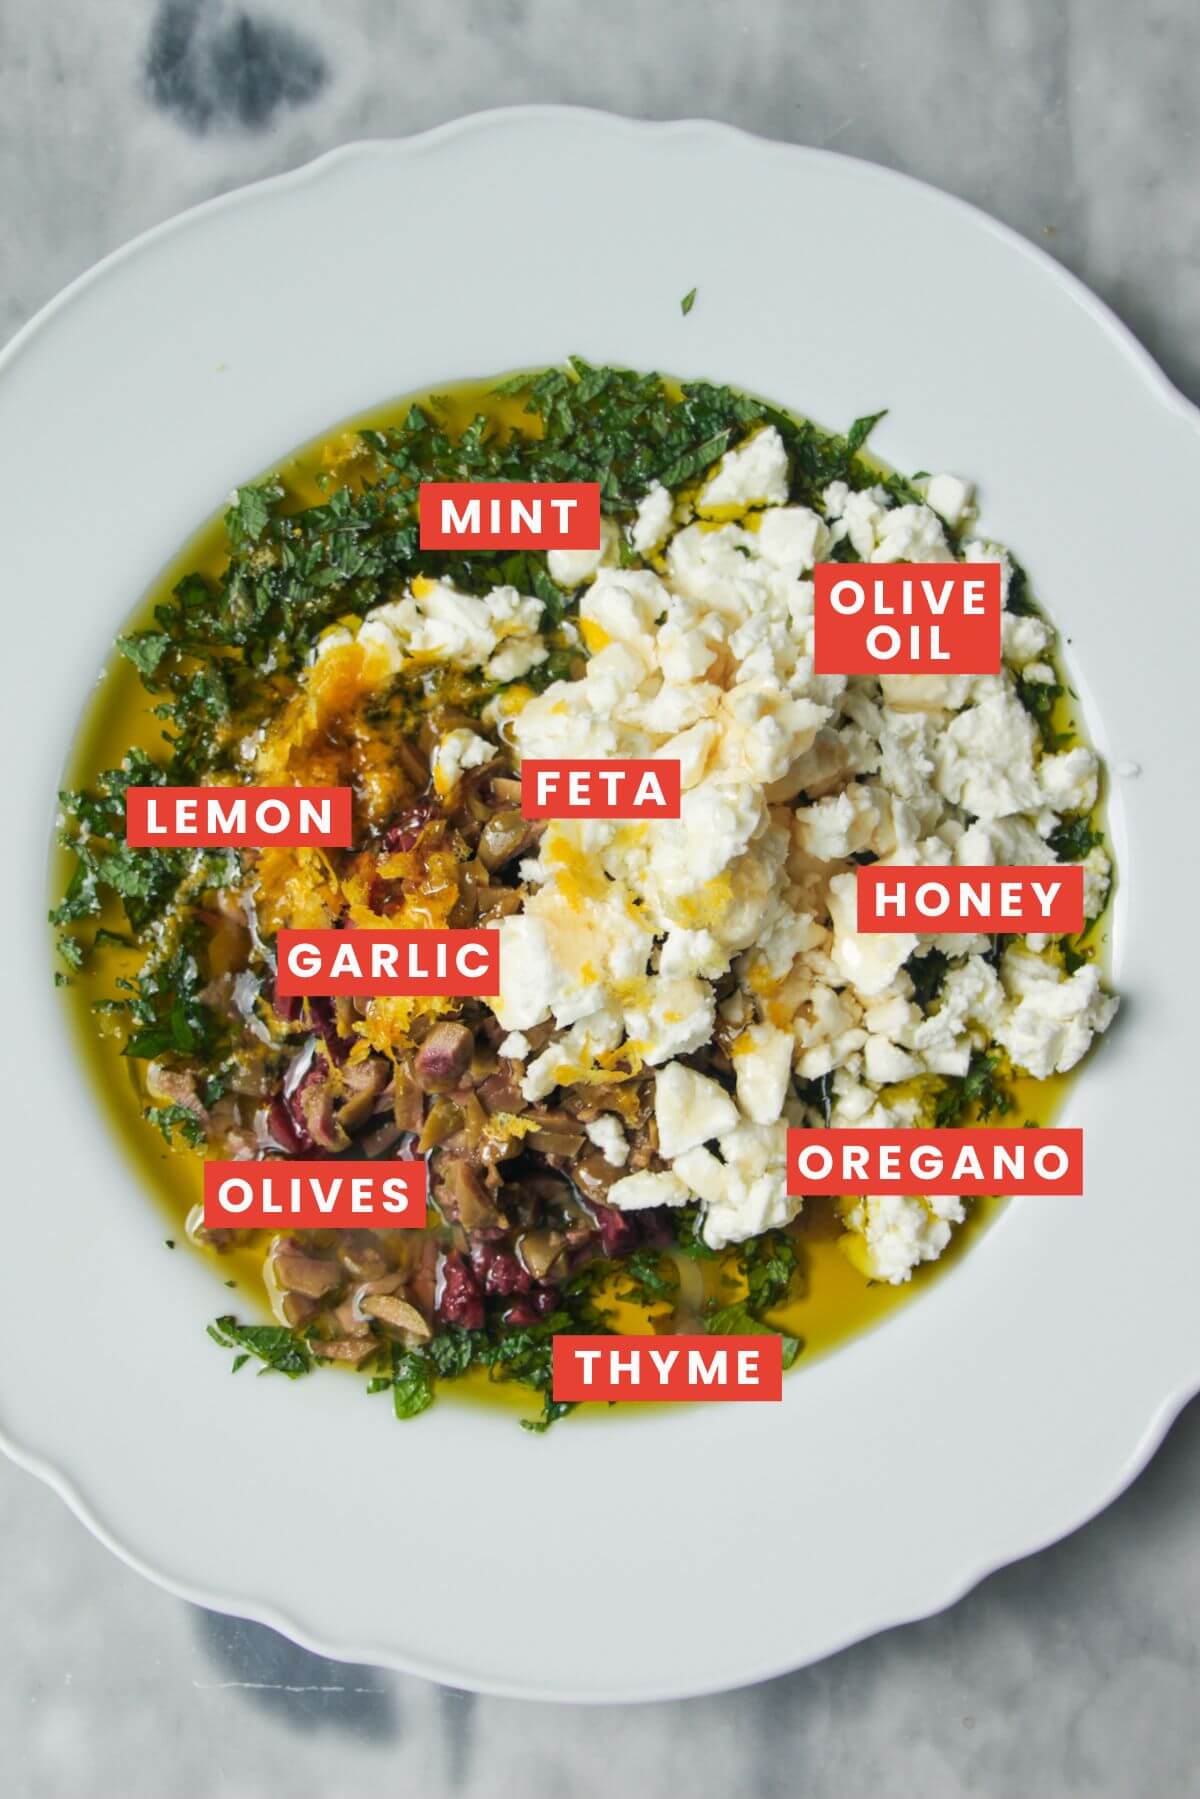 Ingredients in Greek dipping oil in a large white plate.